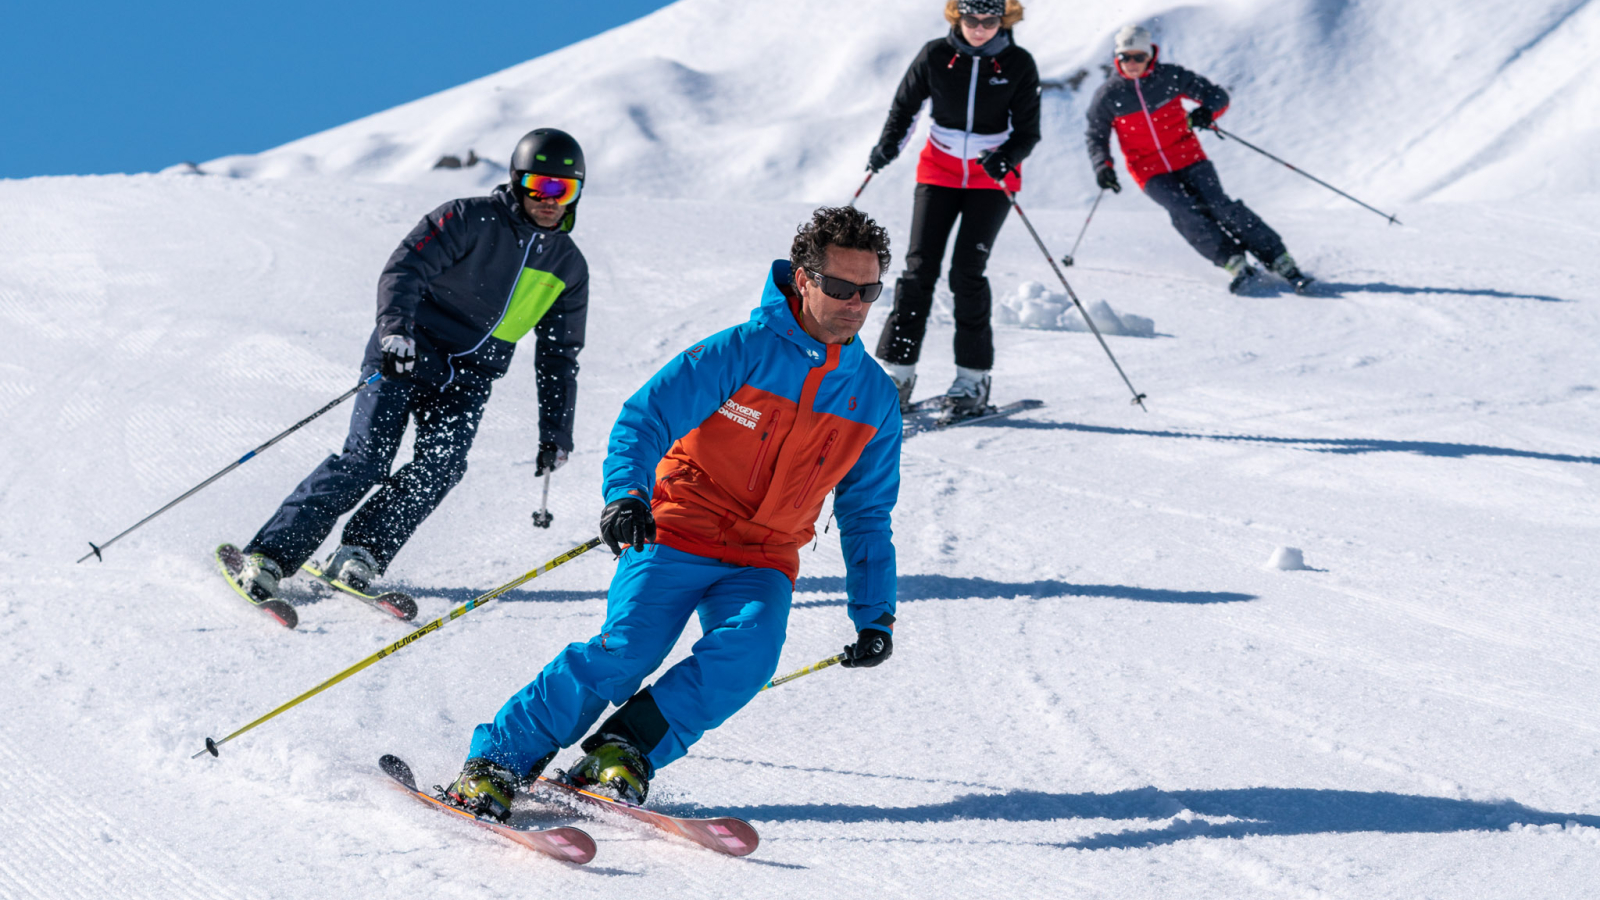 Competent skiers with an Oxygene ski instructor